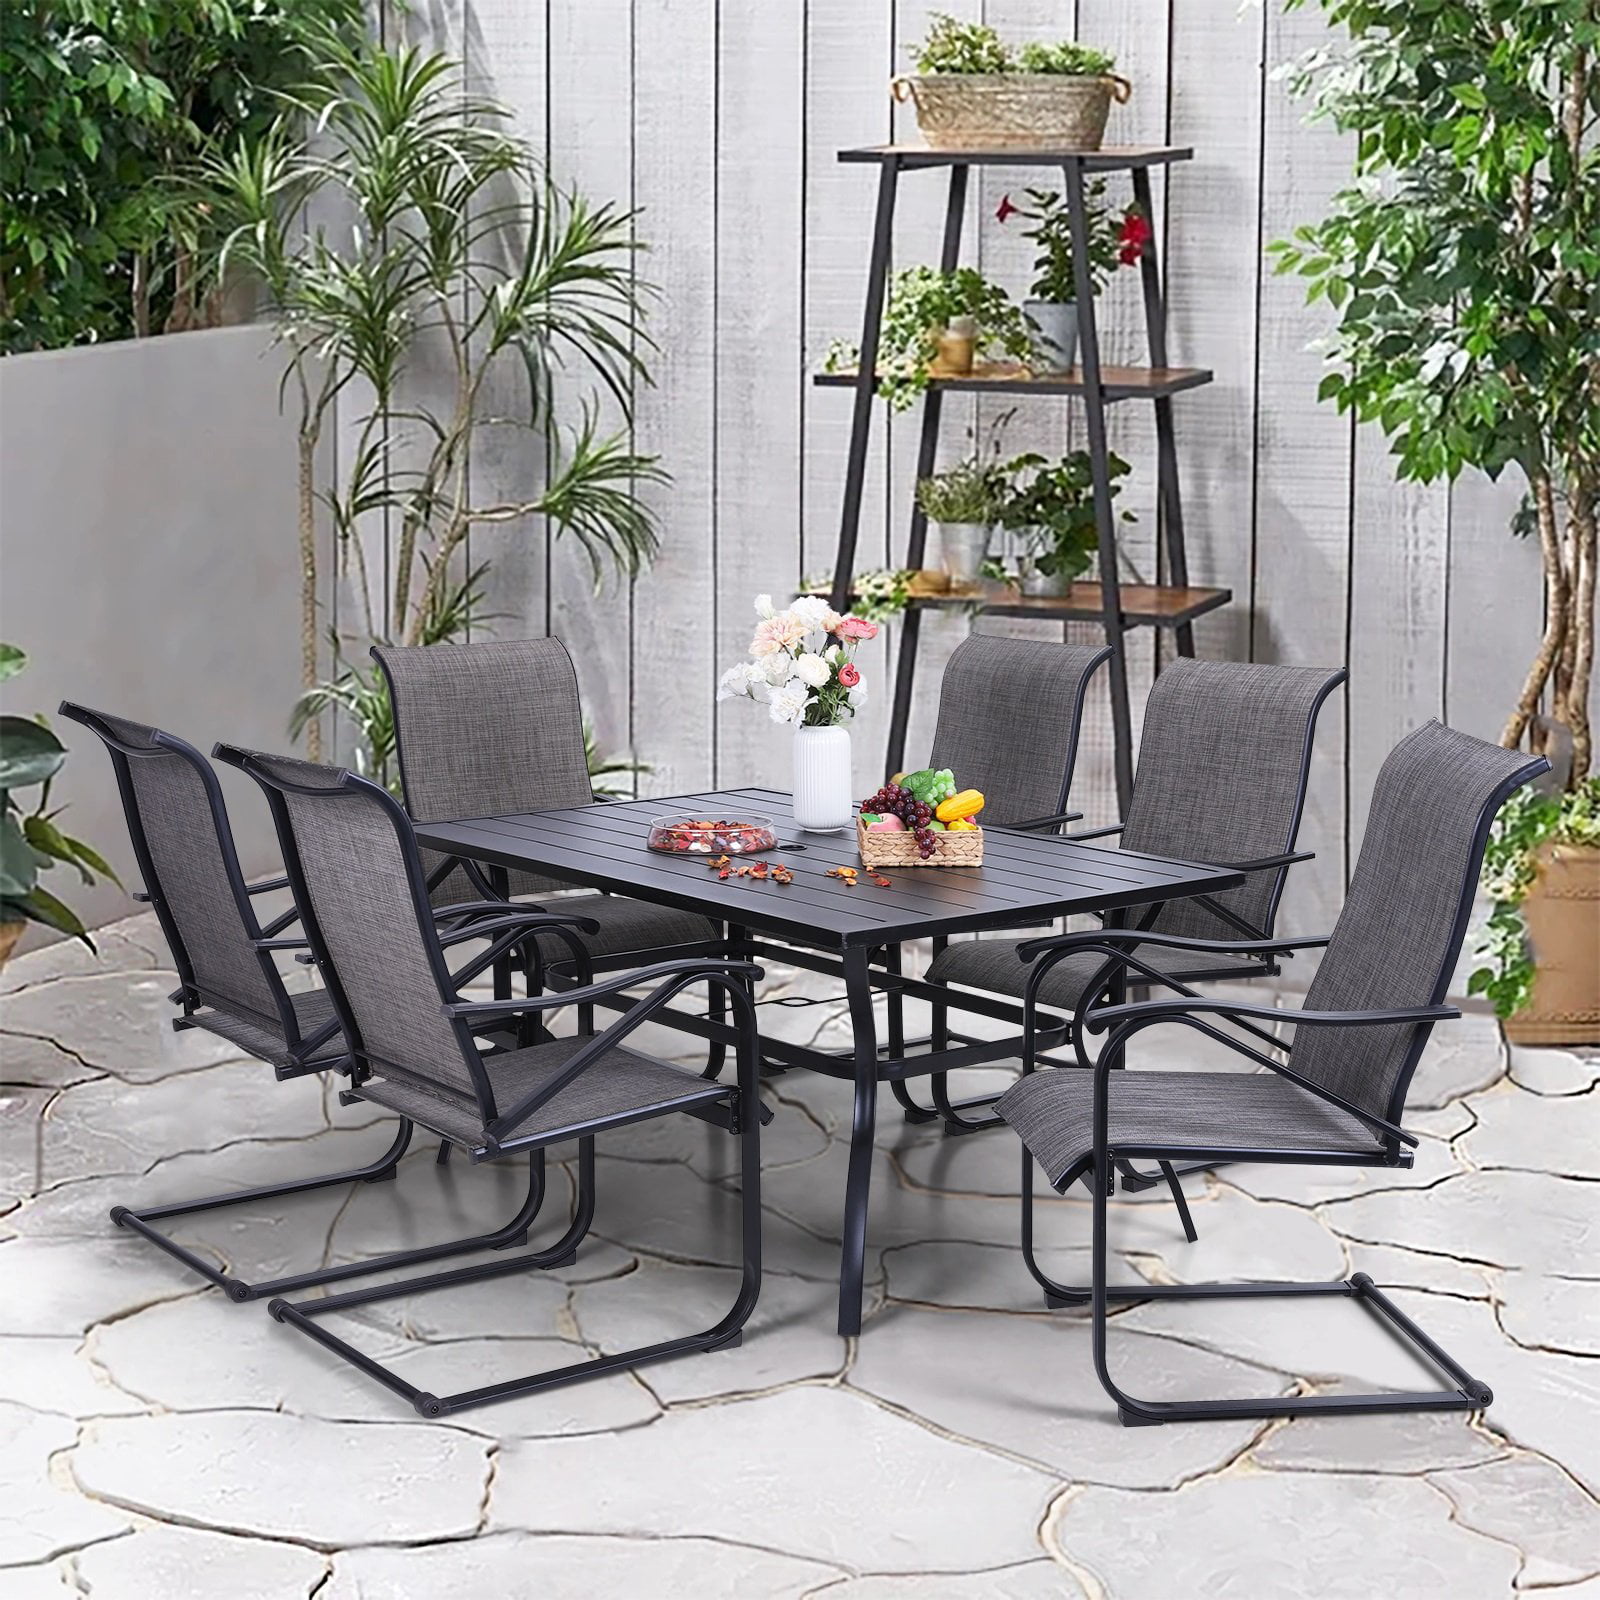 Patio Bistro Table Outdoor Furniture Dining Metal Yard Garden Deck Square Glass 